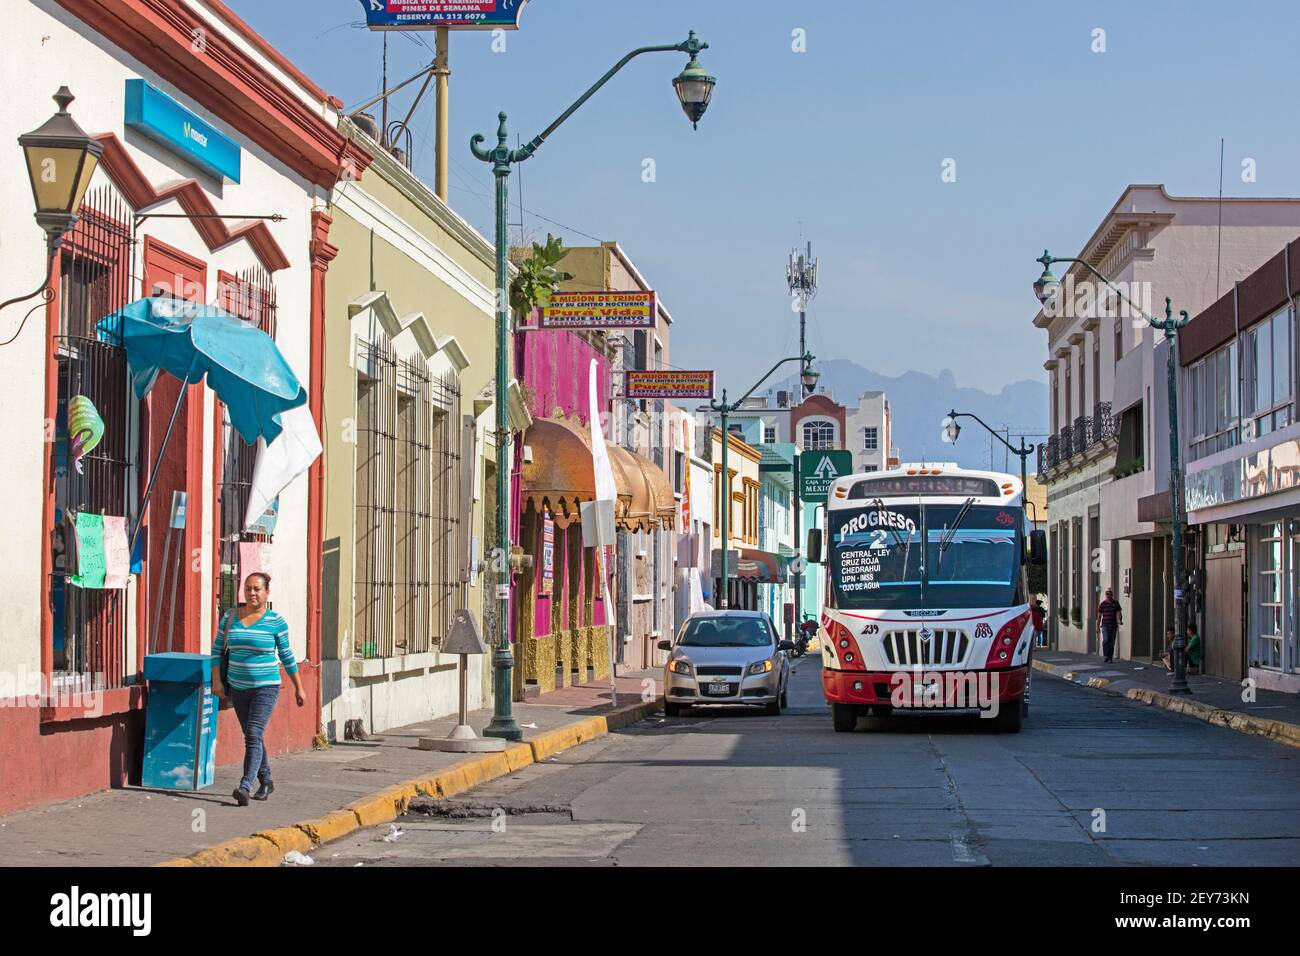 Public transport bus driving the Progreso 2 route through colourful street in the city Tepic, Nayarit, Mexico Stock Photo